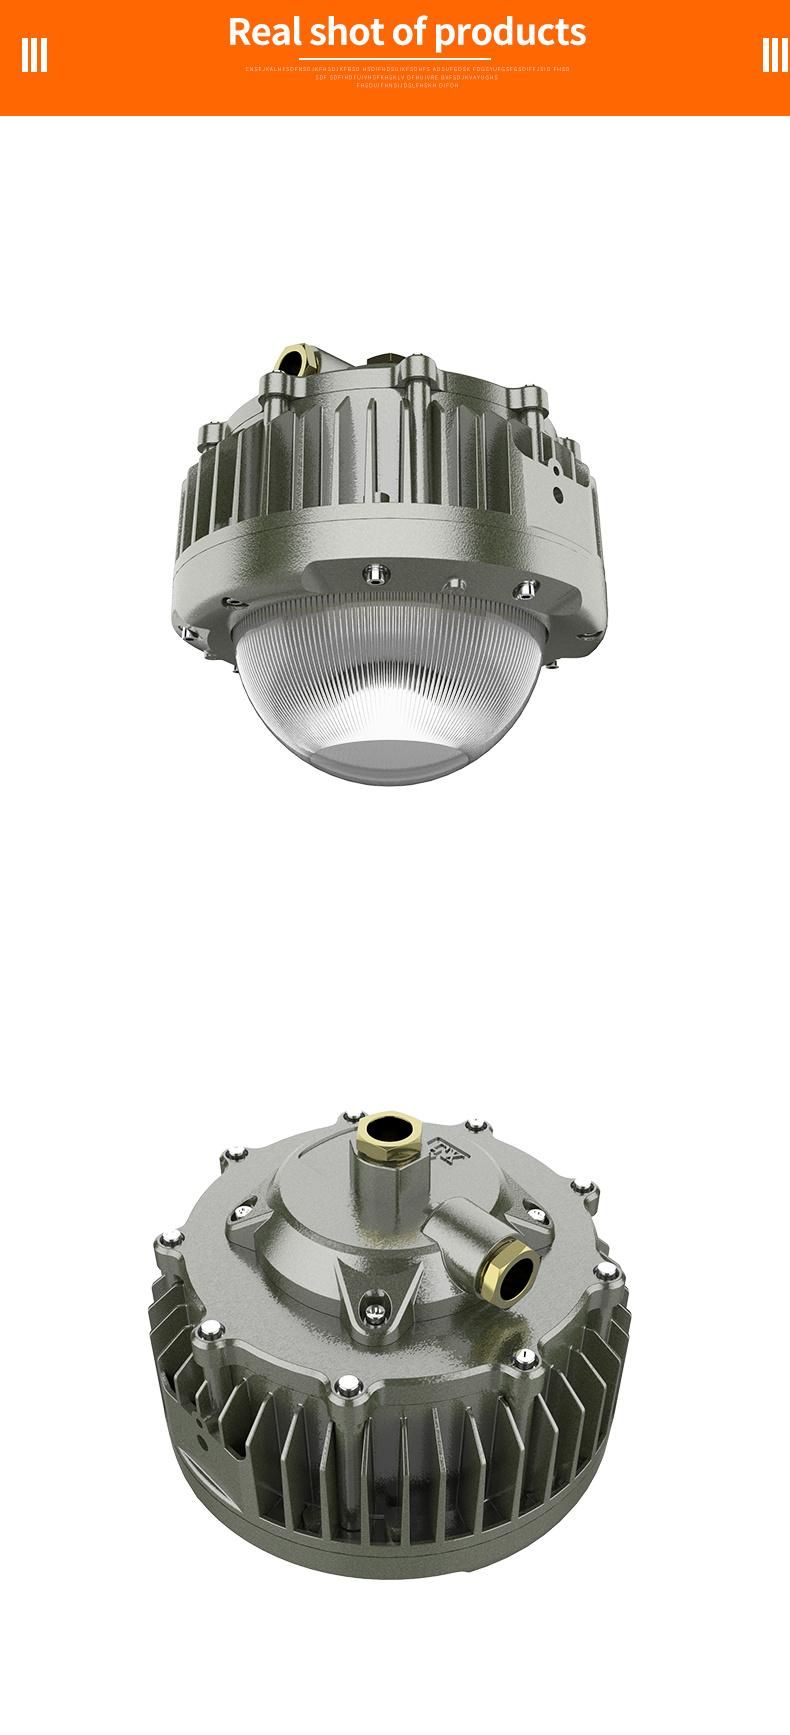 High Quality Ex II Explosion Proof Spot Light with High Efficiency